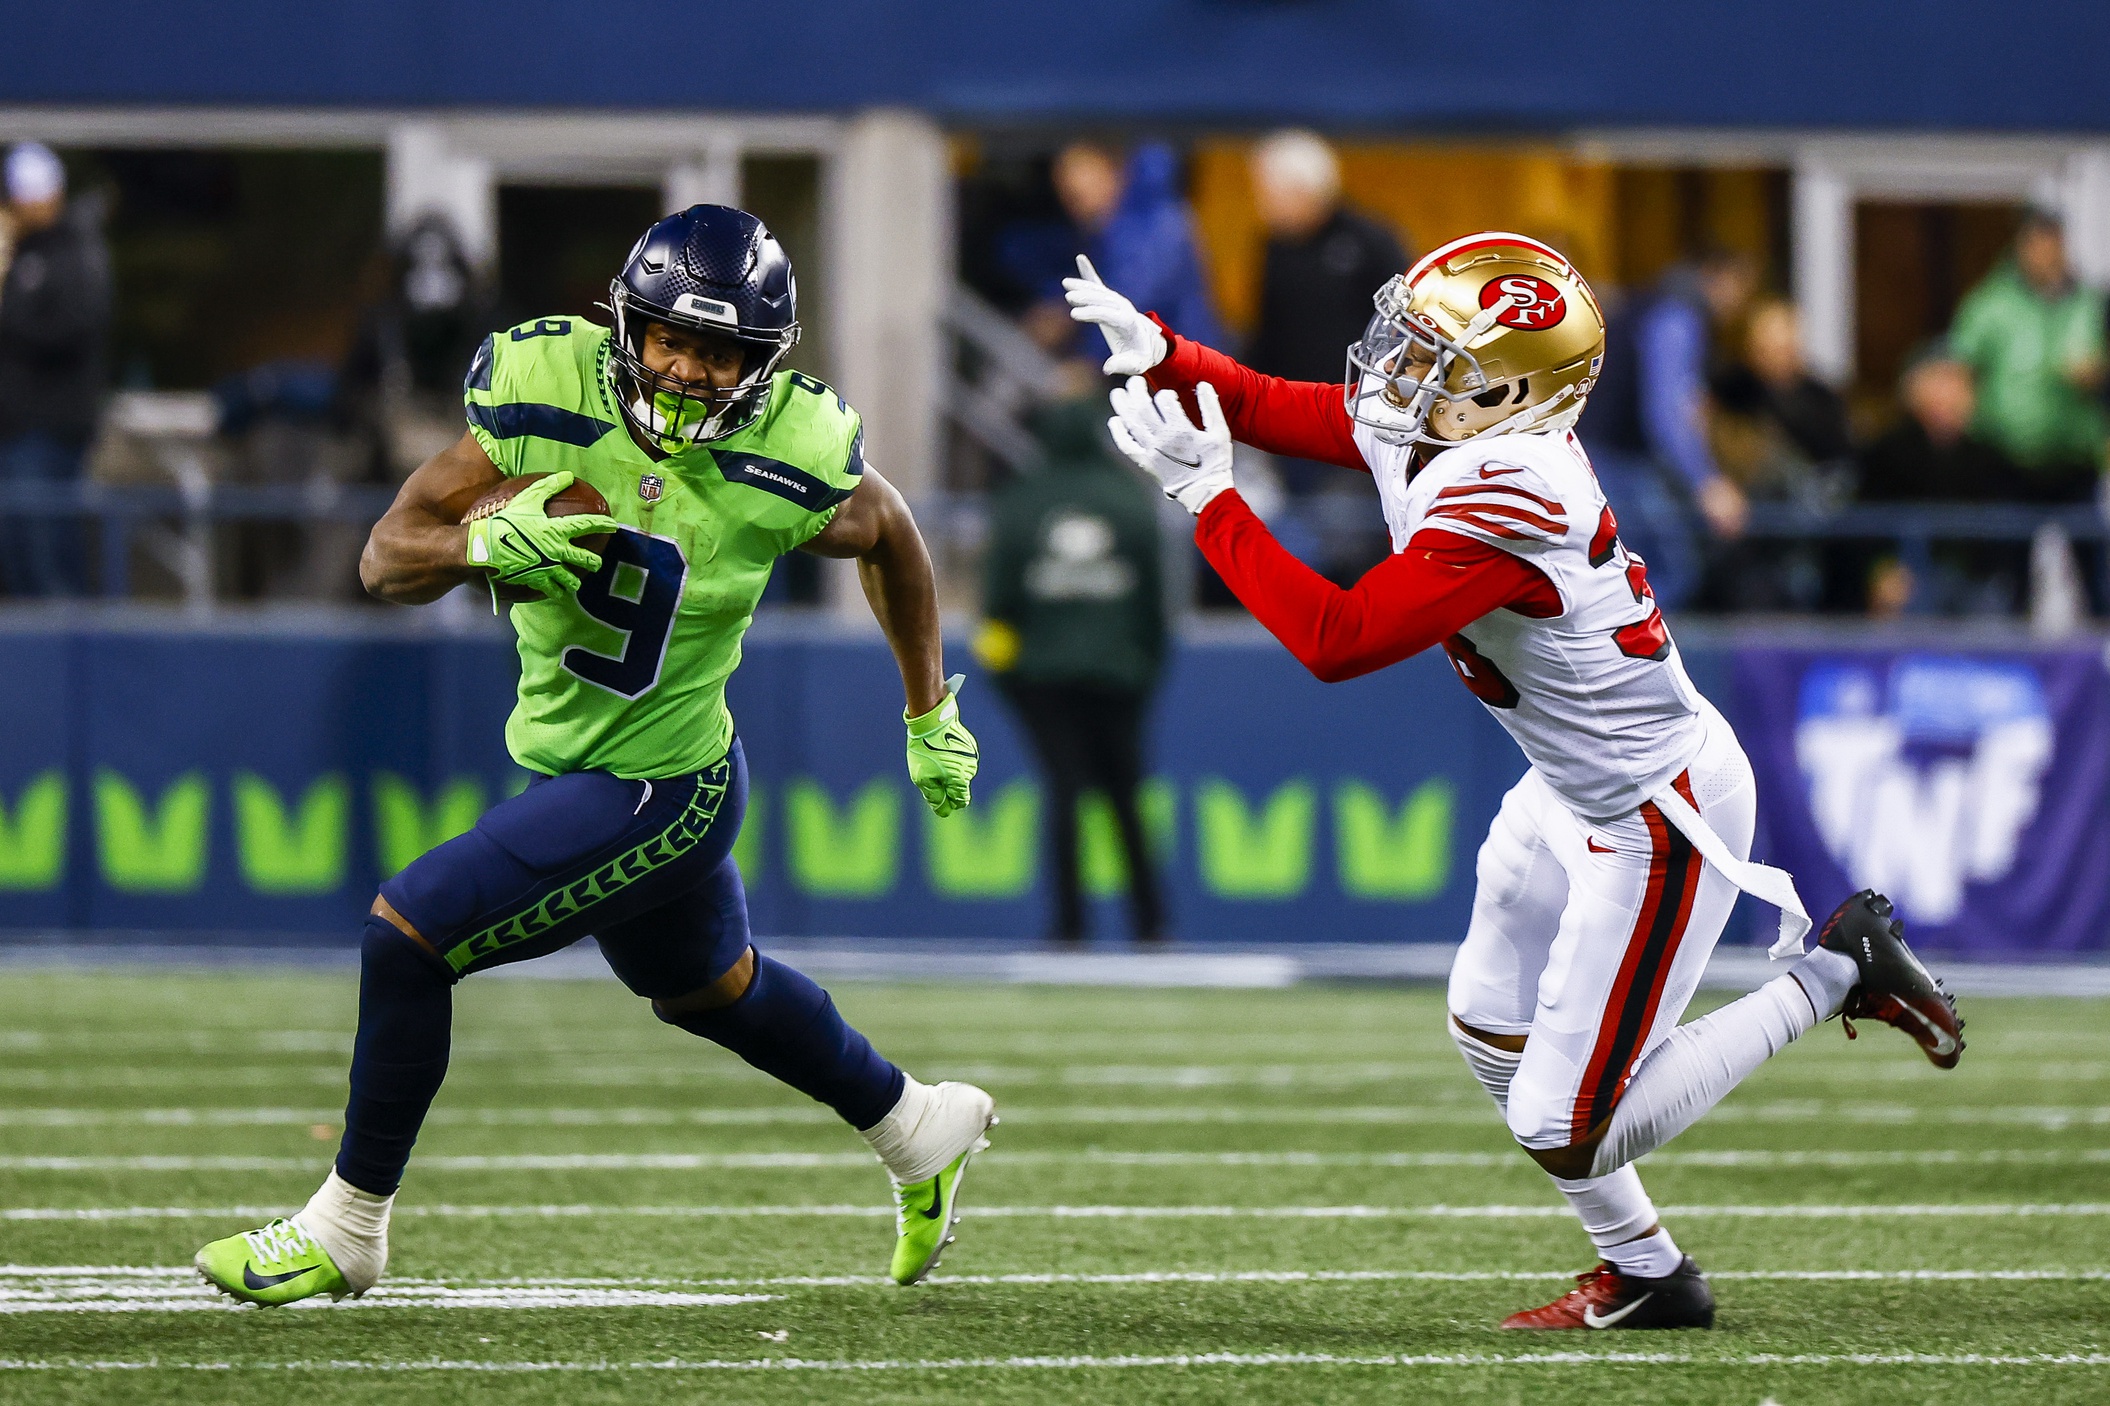 Free NFL picks, predictions for Seahawks vs. 49ers on 'Monday